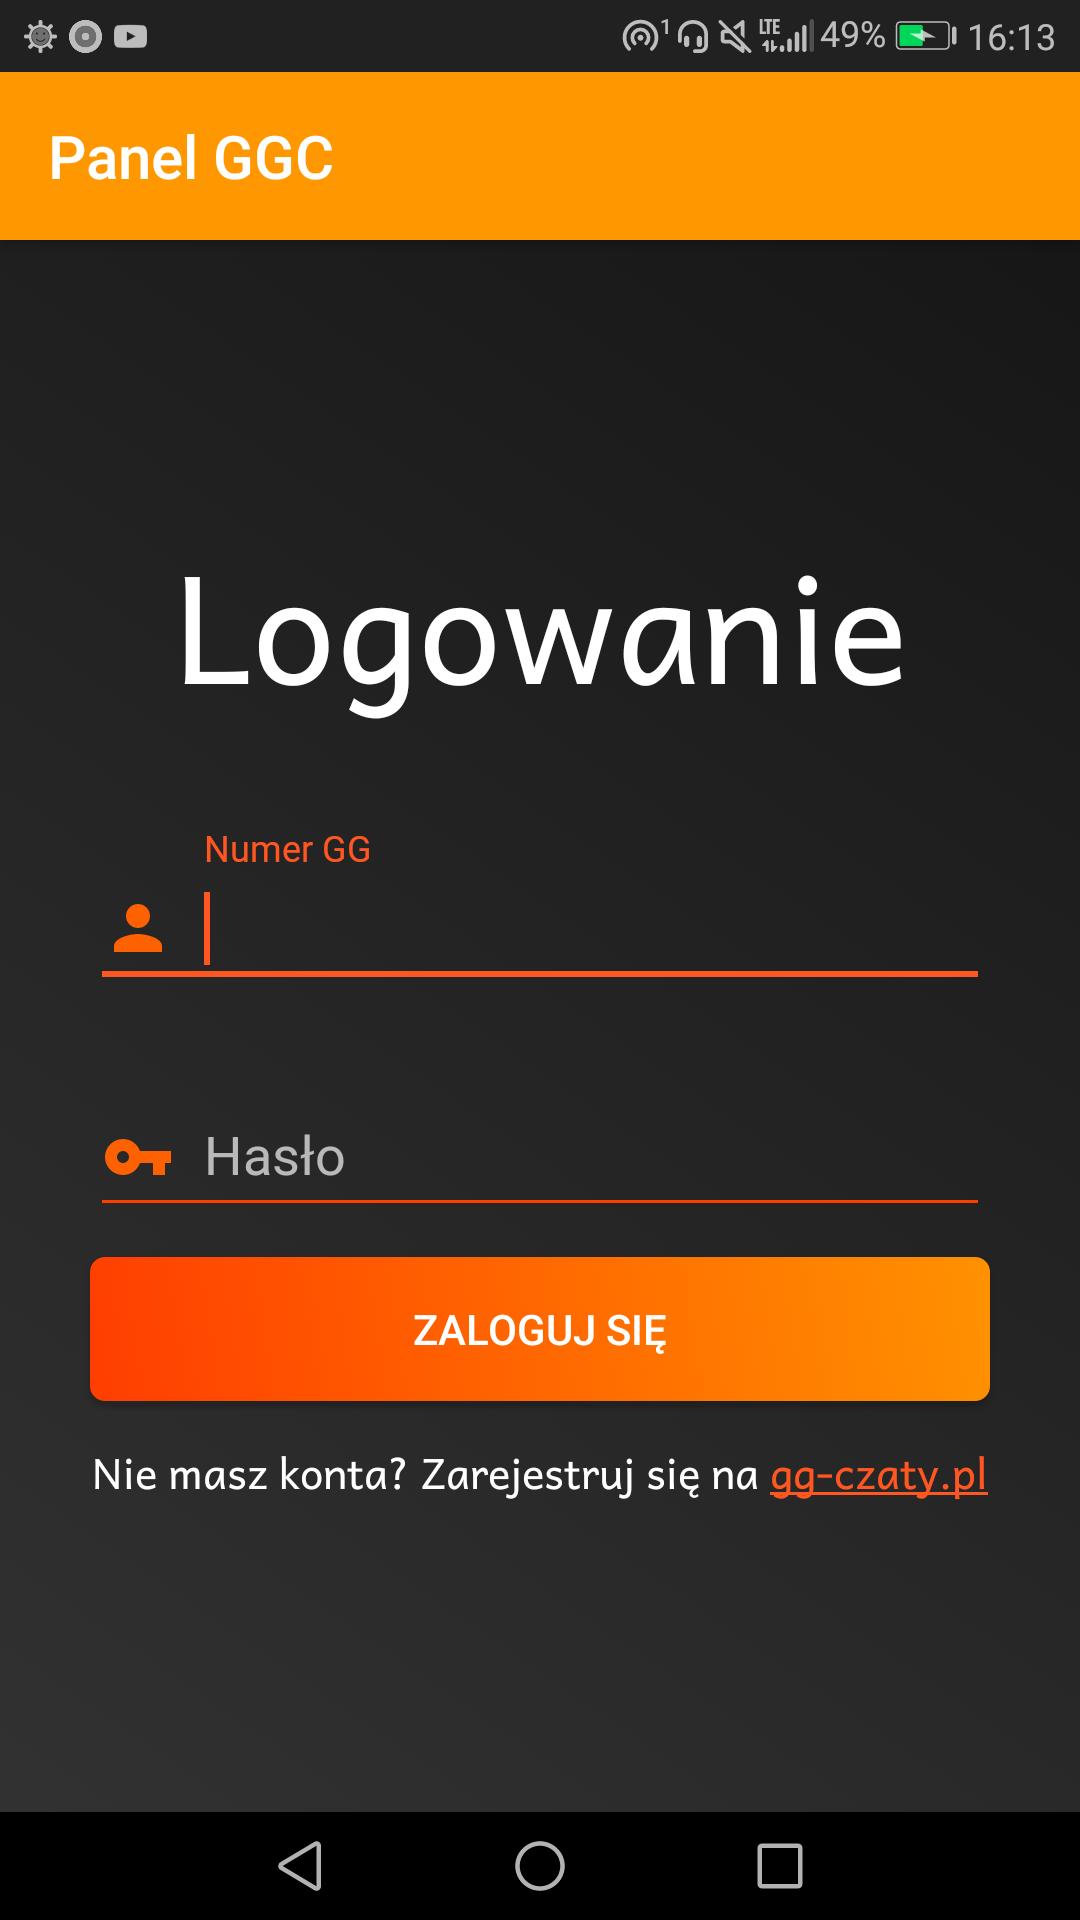 GG Czaty - Panel Administracyjny for Android - APK Download